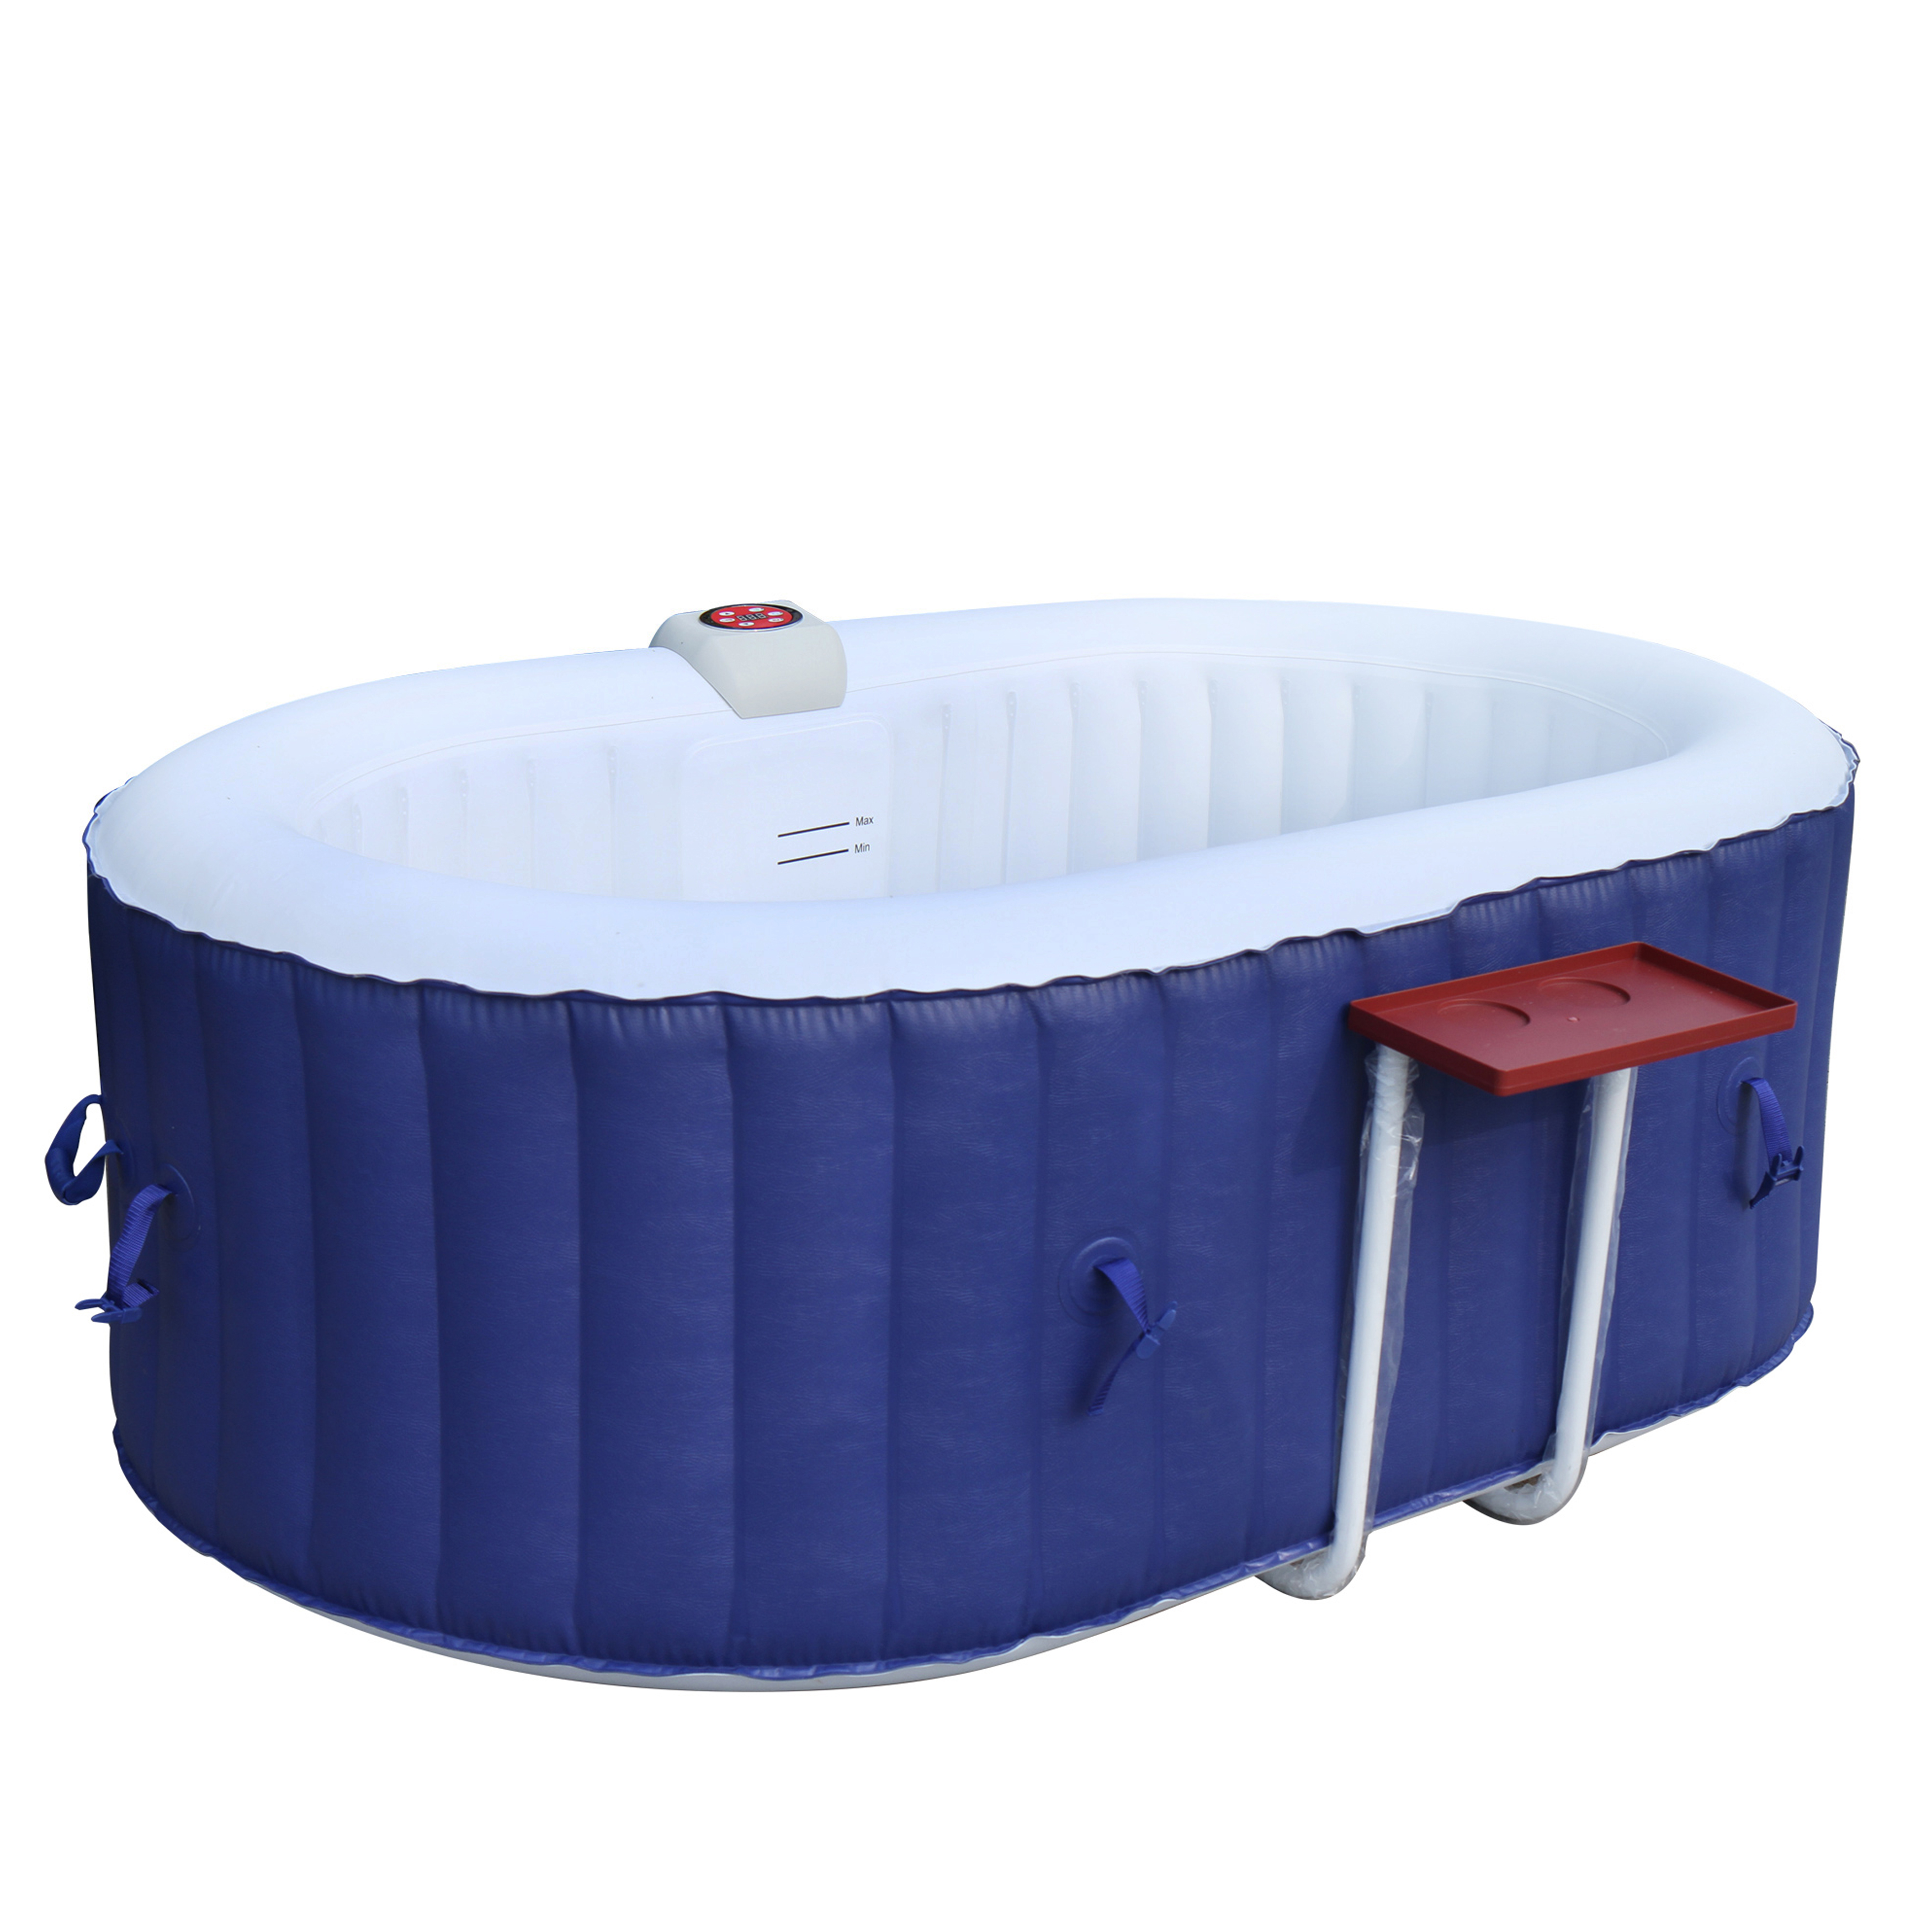 ALEKO Oval Inflatable Dark Blue 2 Person Hot Tub Spa with Drink Tray and Cover - image 1 of 14